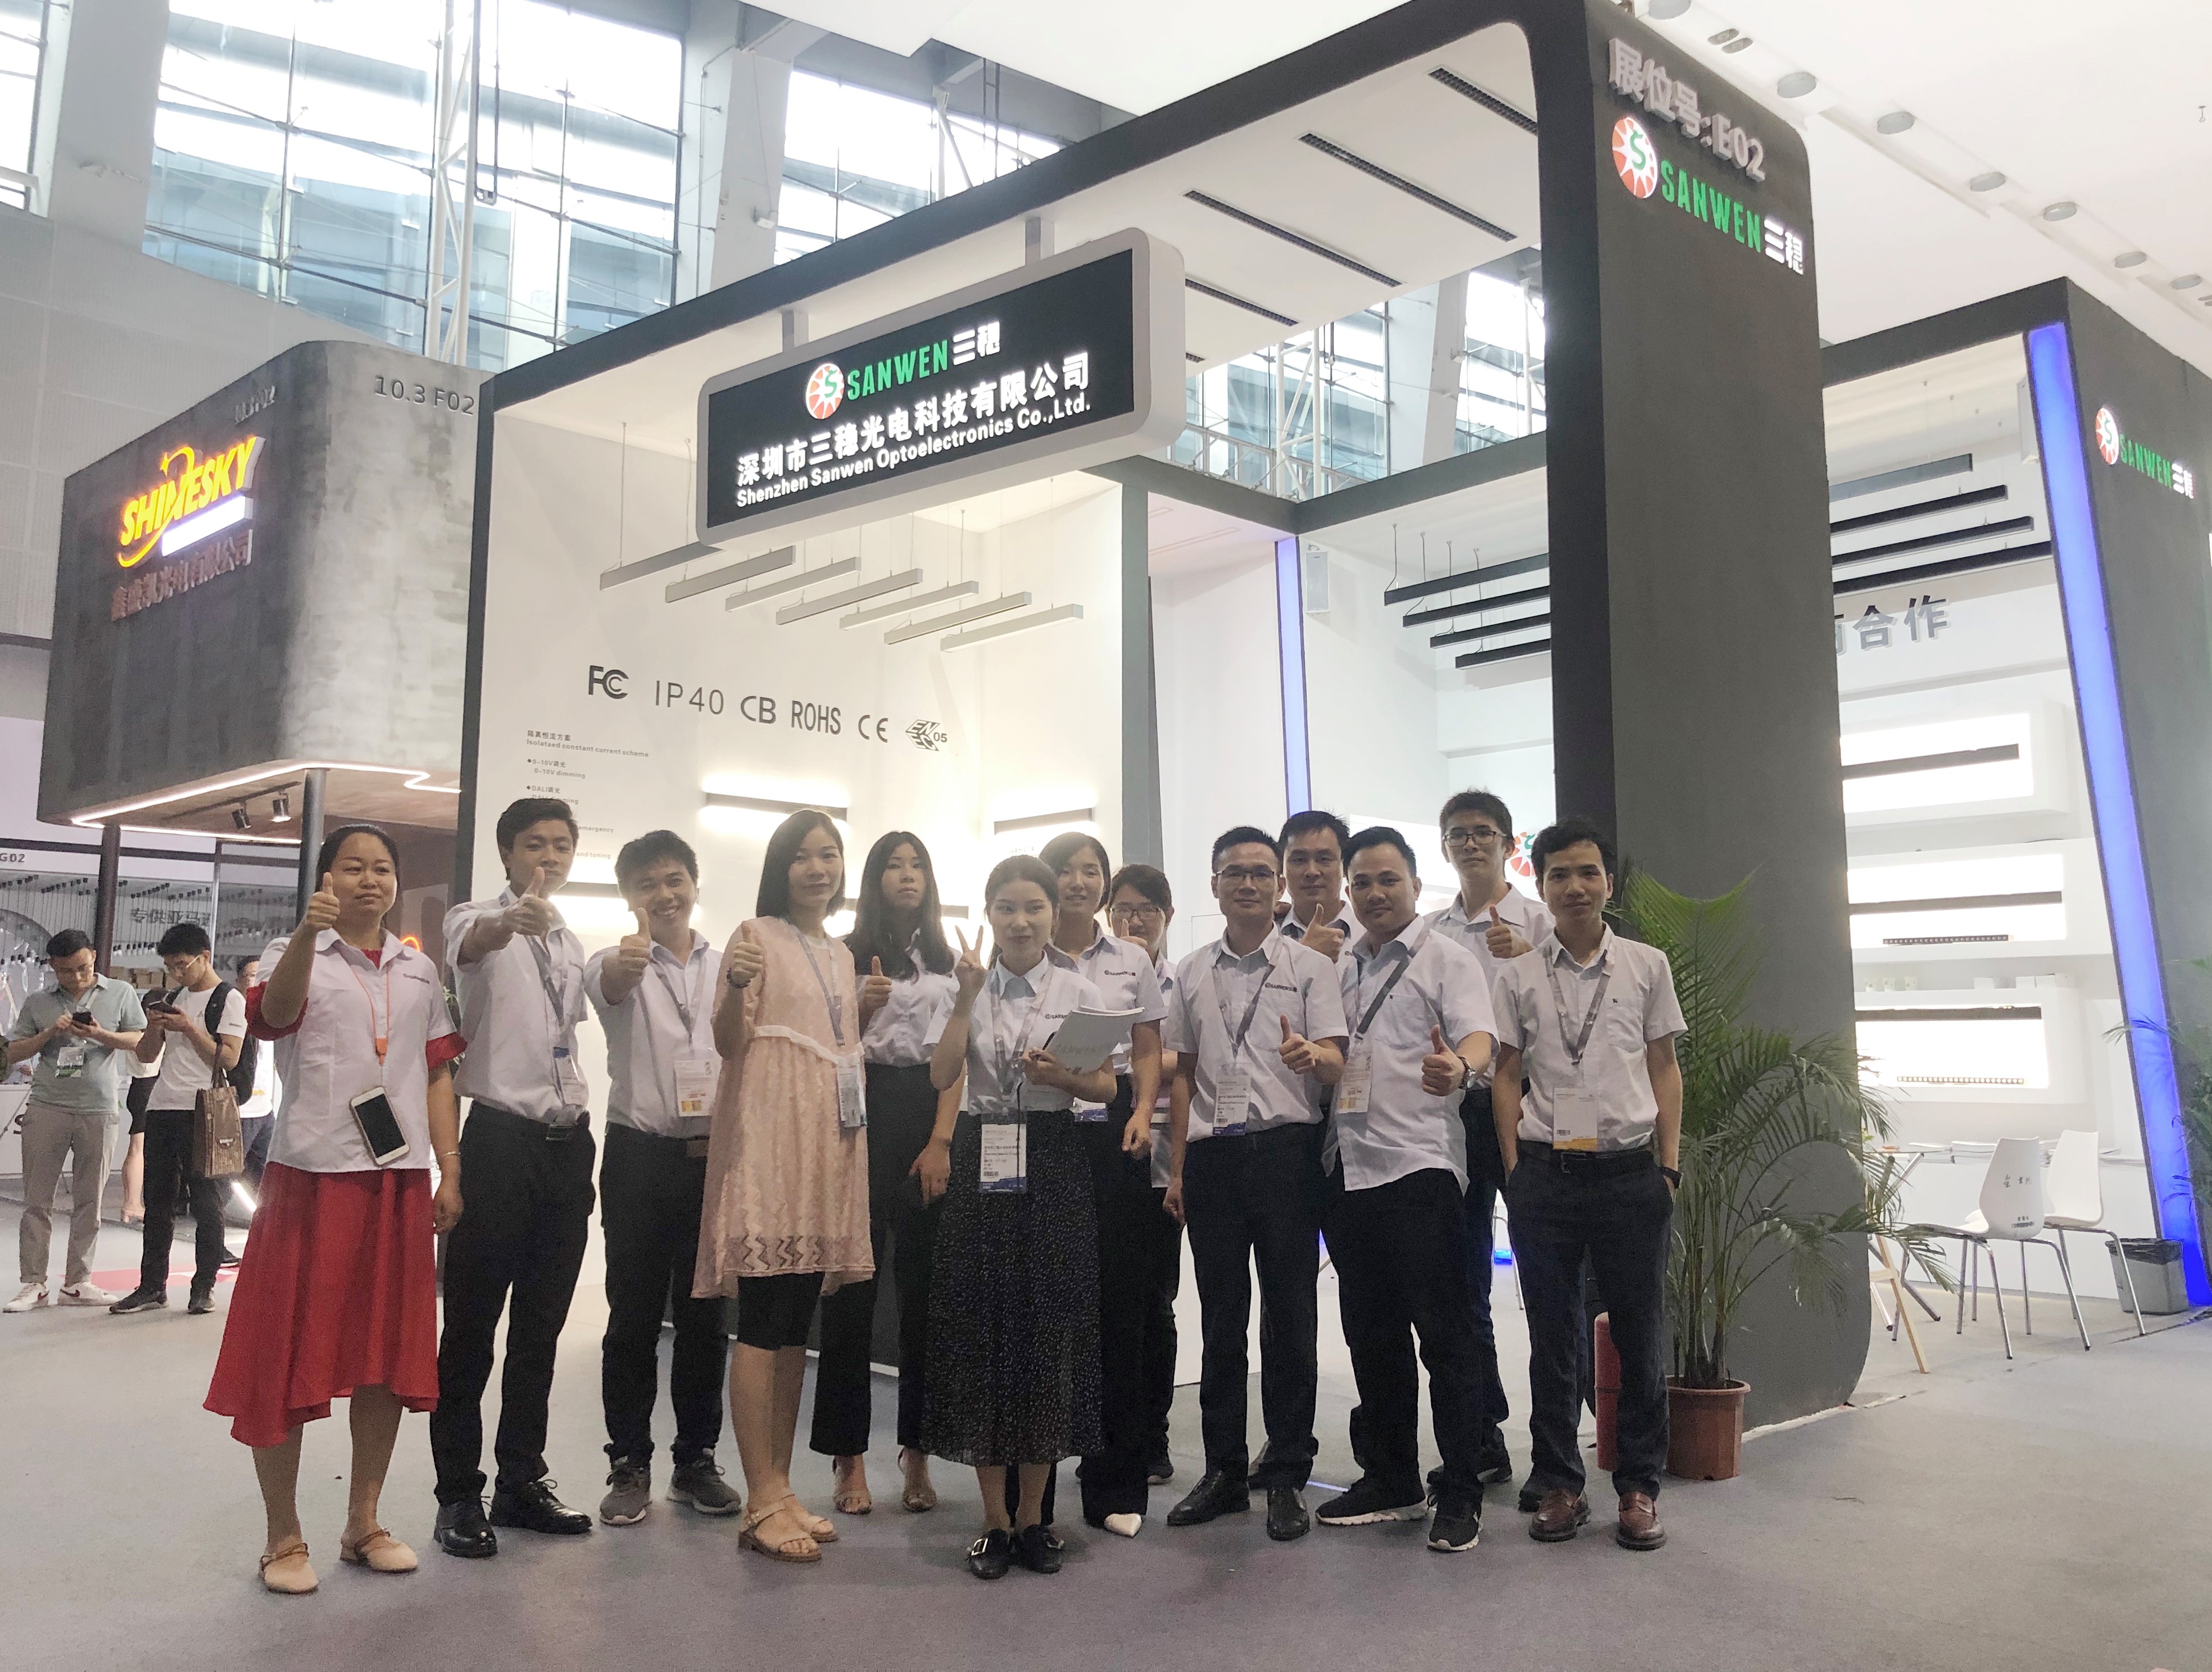 The Grand Spot of Guangzhou International Lighting Exhibition in 2019